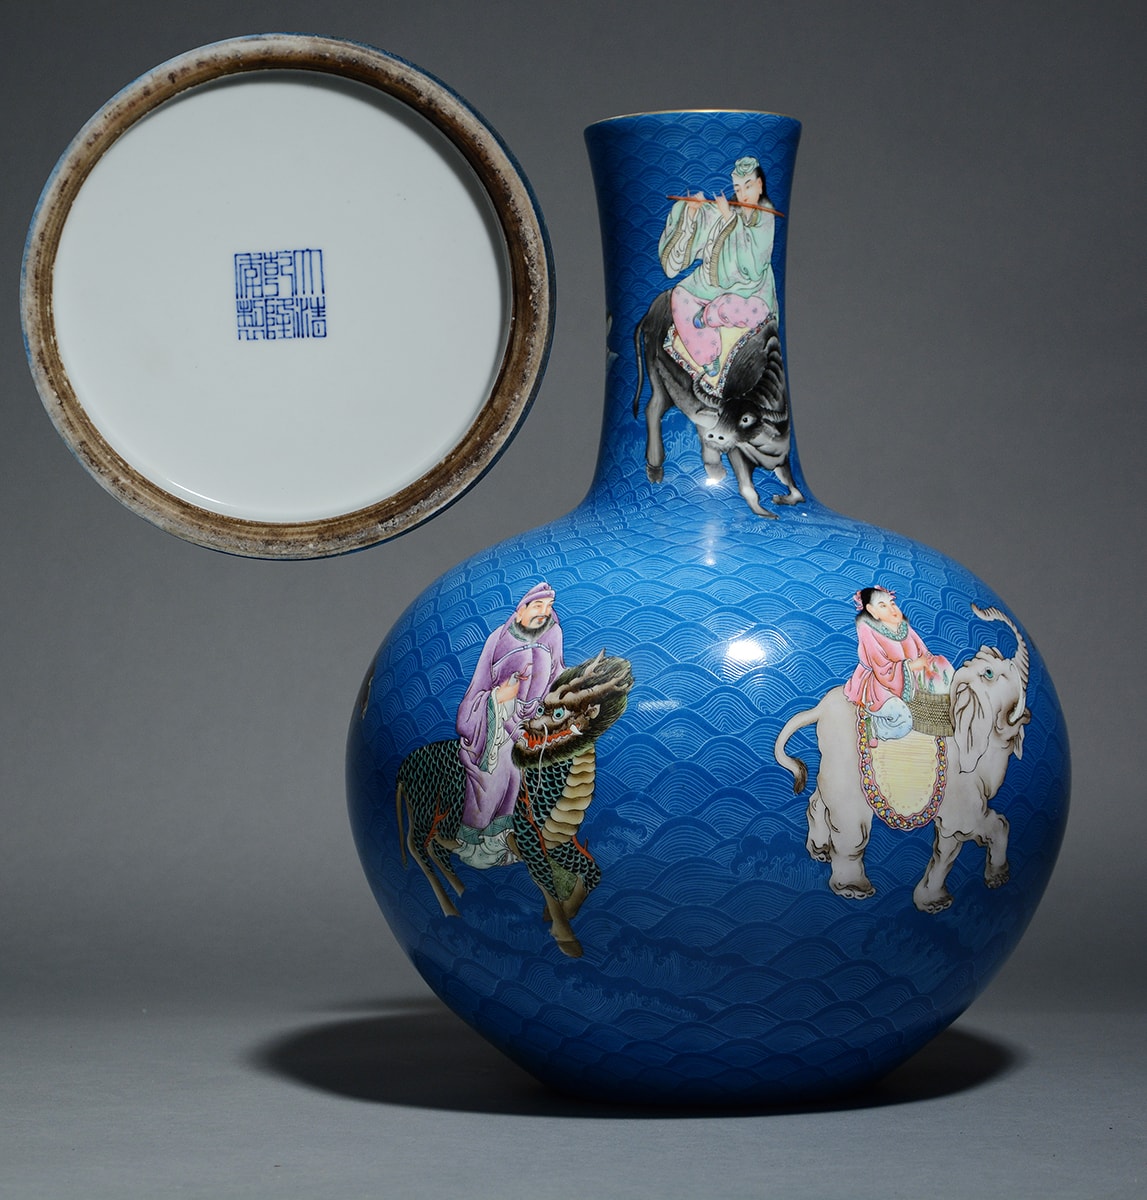 Chinese mark and period porcelains are in high demand